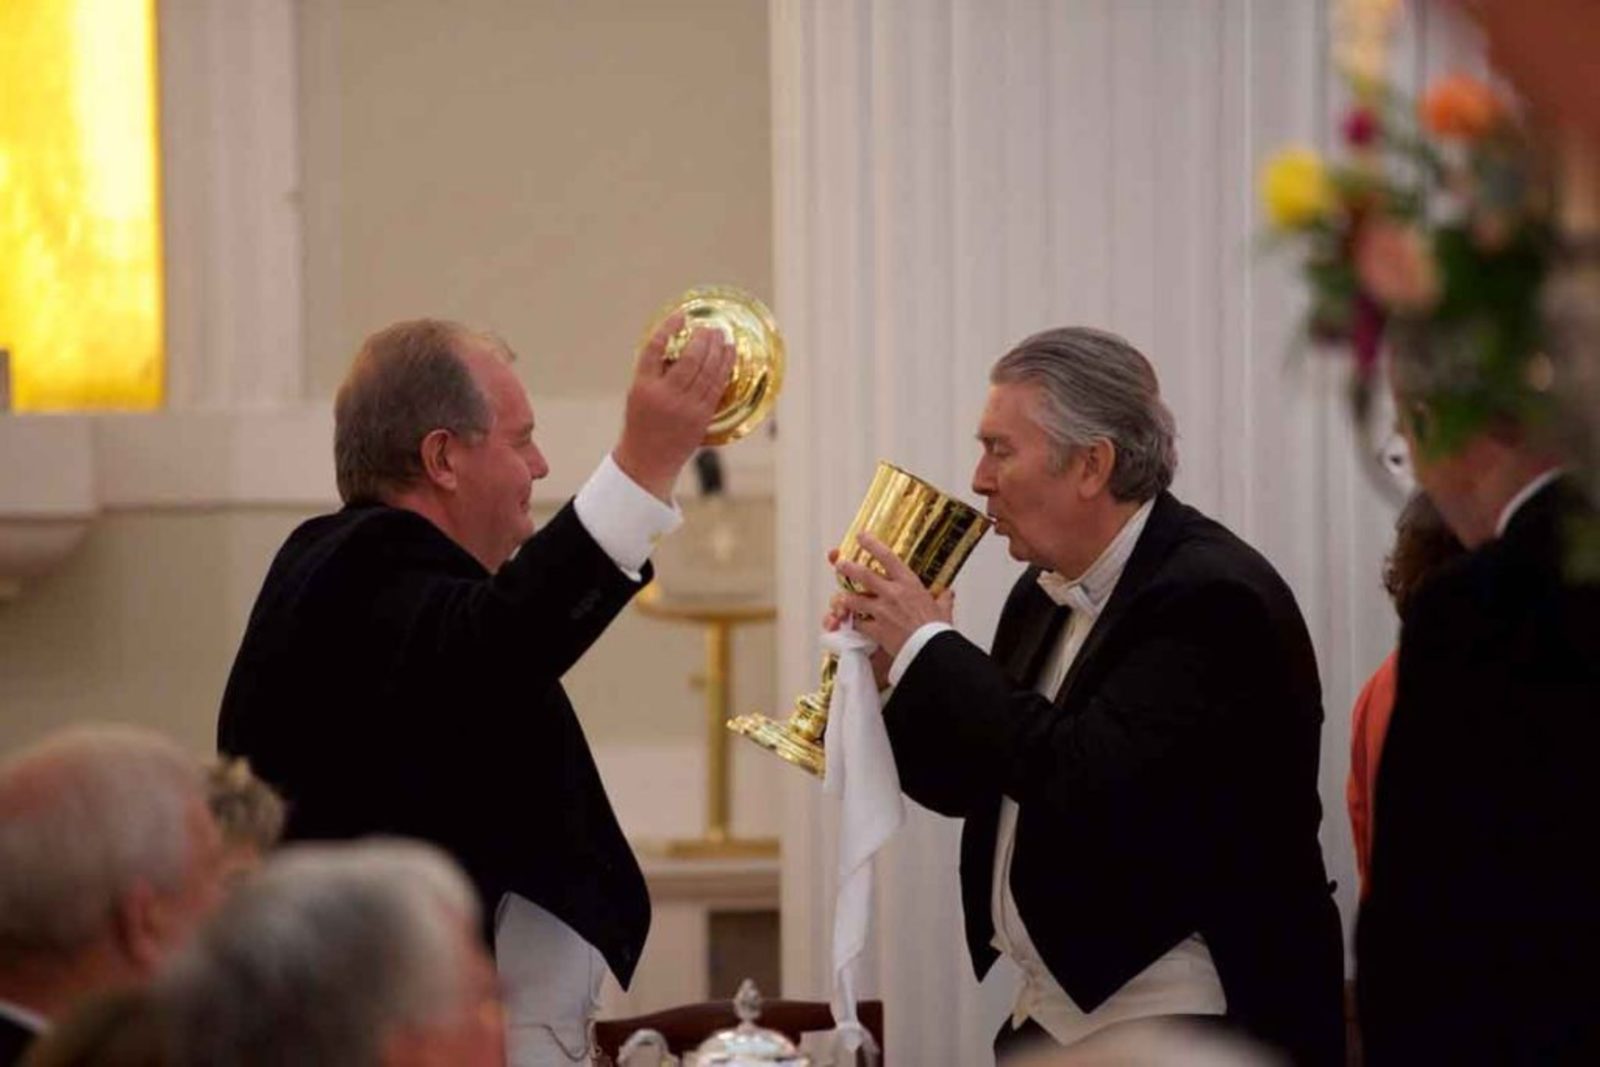 Participating in the Loving Cup Ceremony